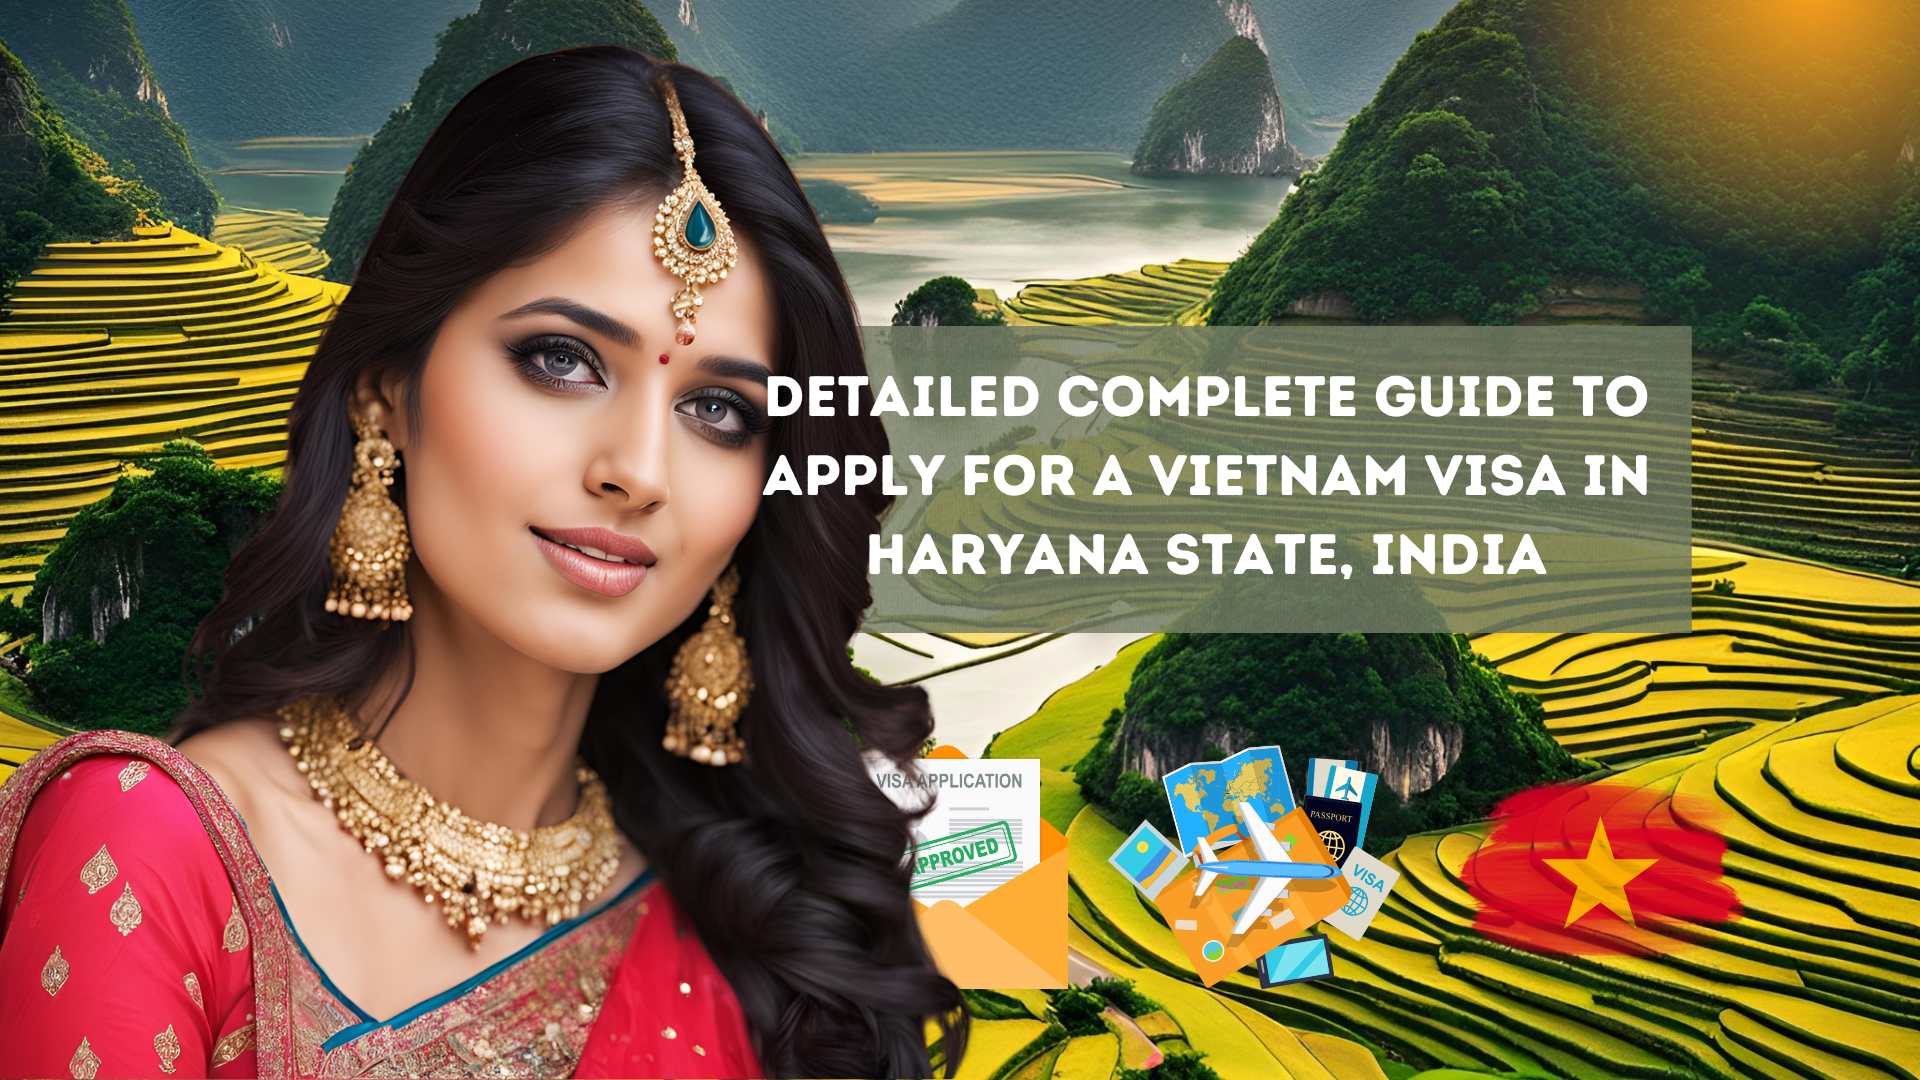 Detailed Complete Guide to Apply for a Vietnam Visa in Haryana State, India